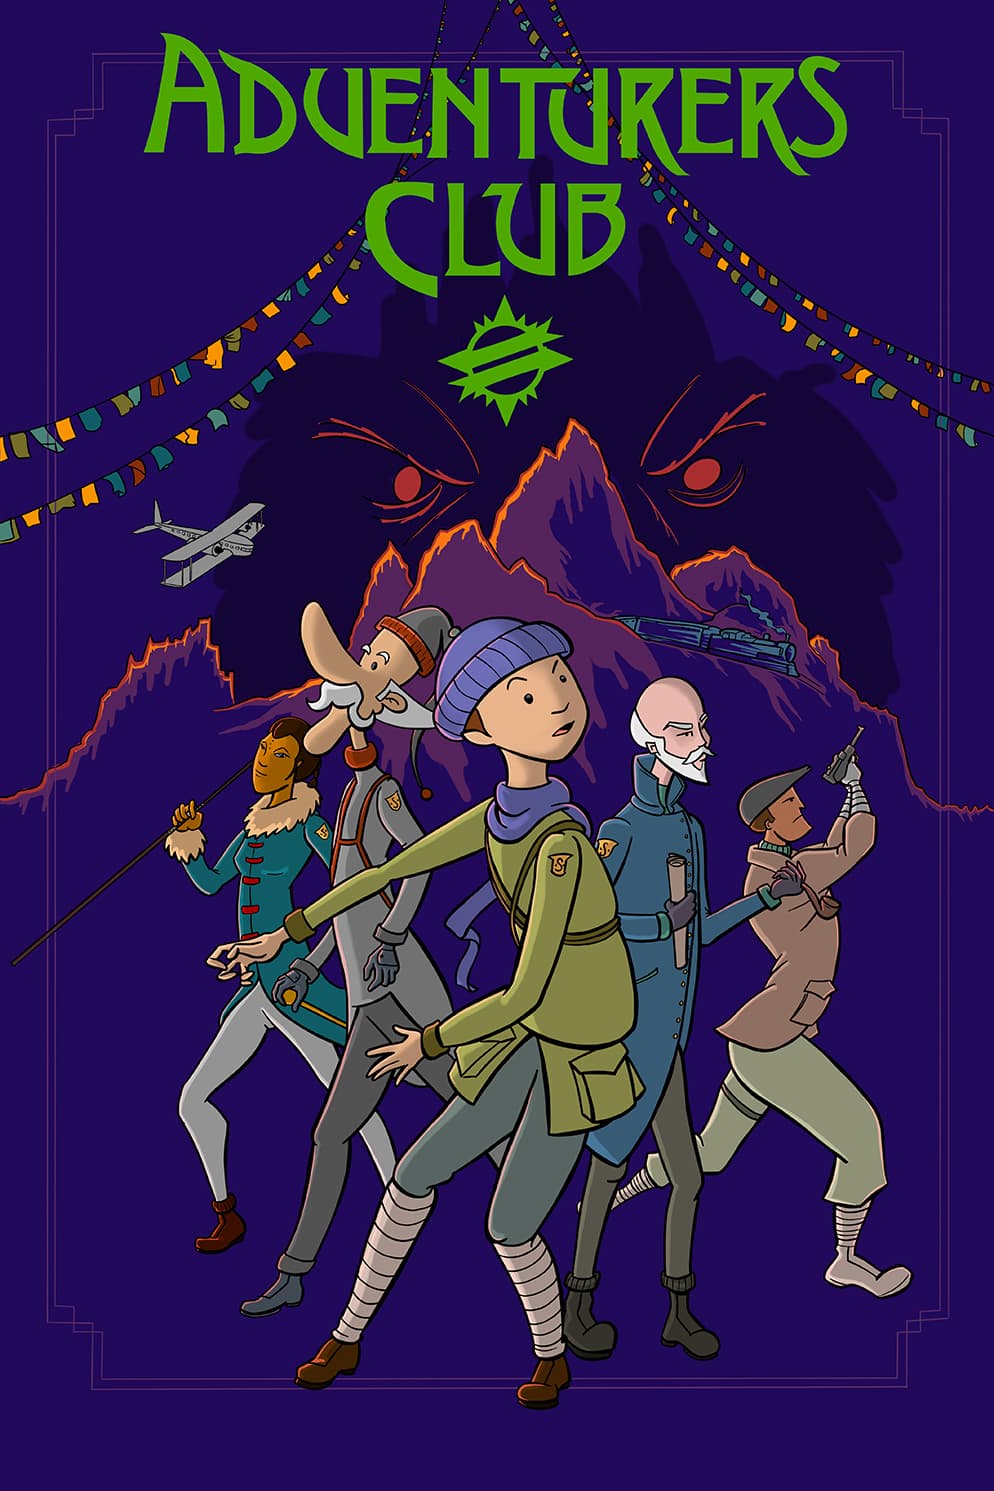 The Adventurers Club Comic book 2 cover